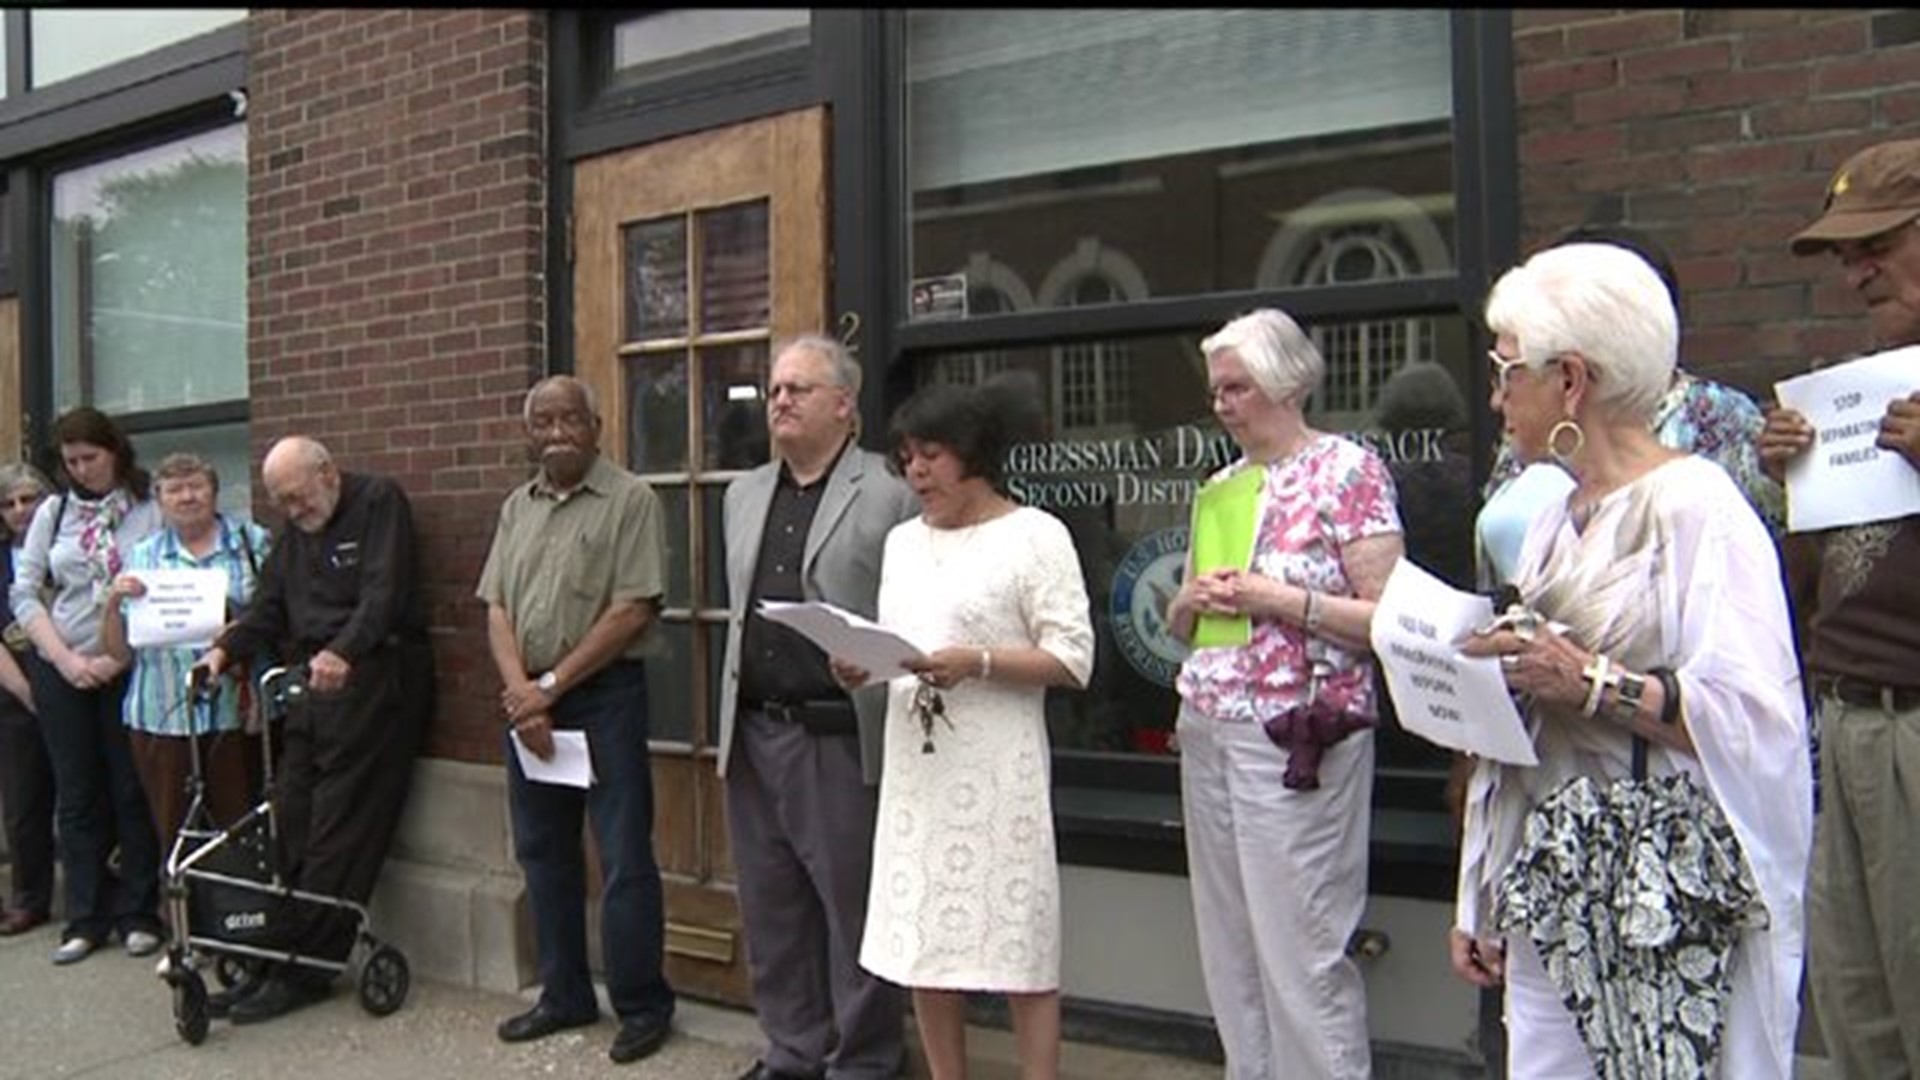 Locals call on Congress for immigration reform